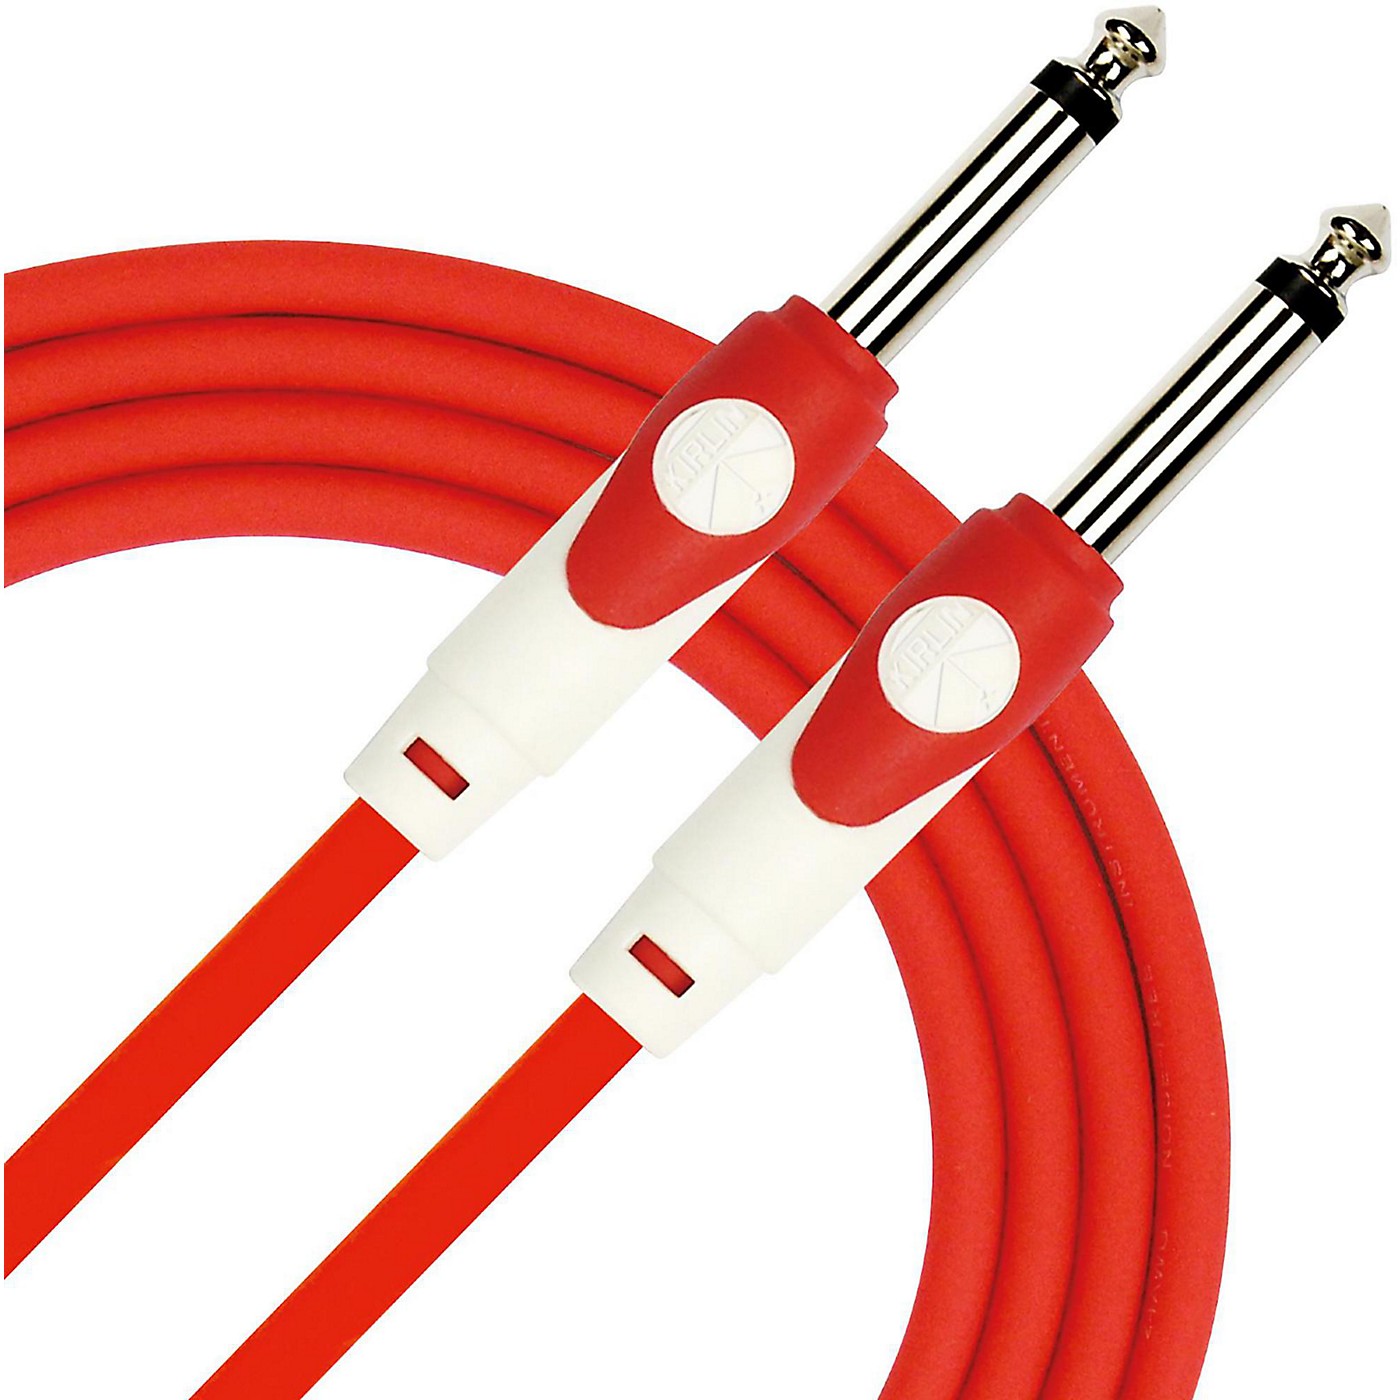 KIRLIN LightGear Instrument Cable - 10ft with PVC Jacket thumbnail